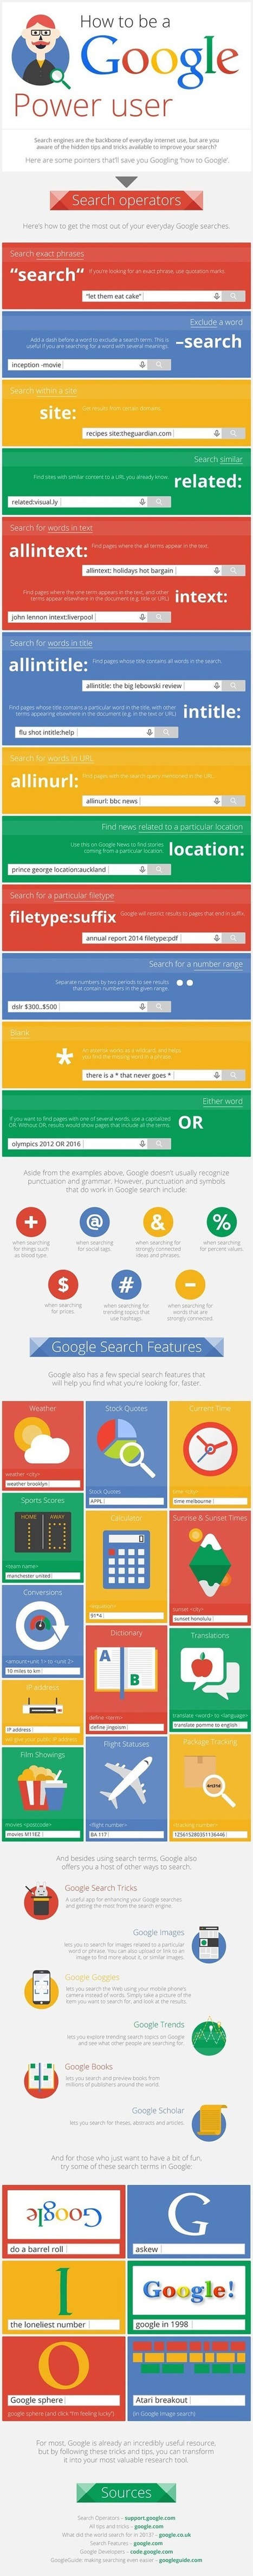 46 Hidden Tips and Tricks to Use Google Search Like a Boss: Infographic | Distance Learning, mLearning, Digital Education, Technology | Scoop.it